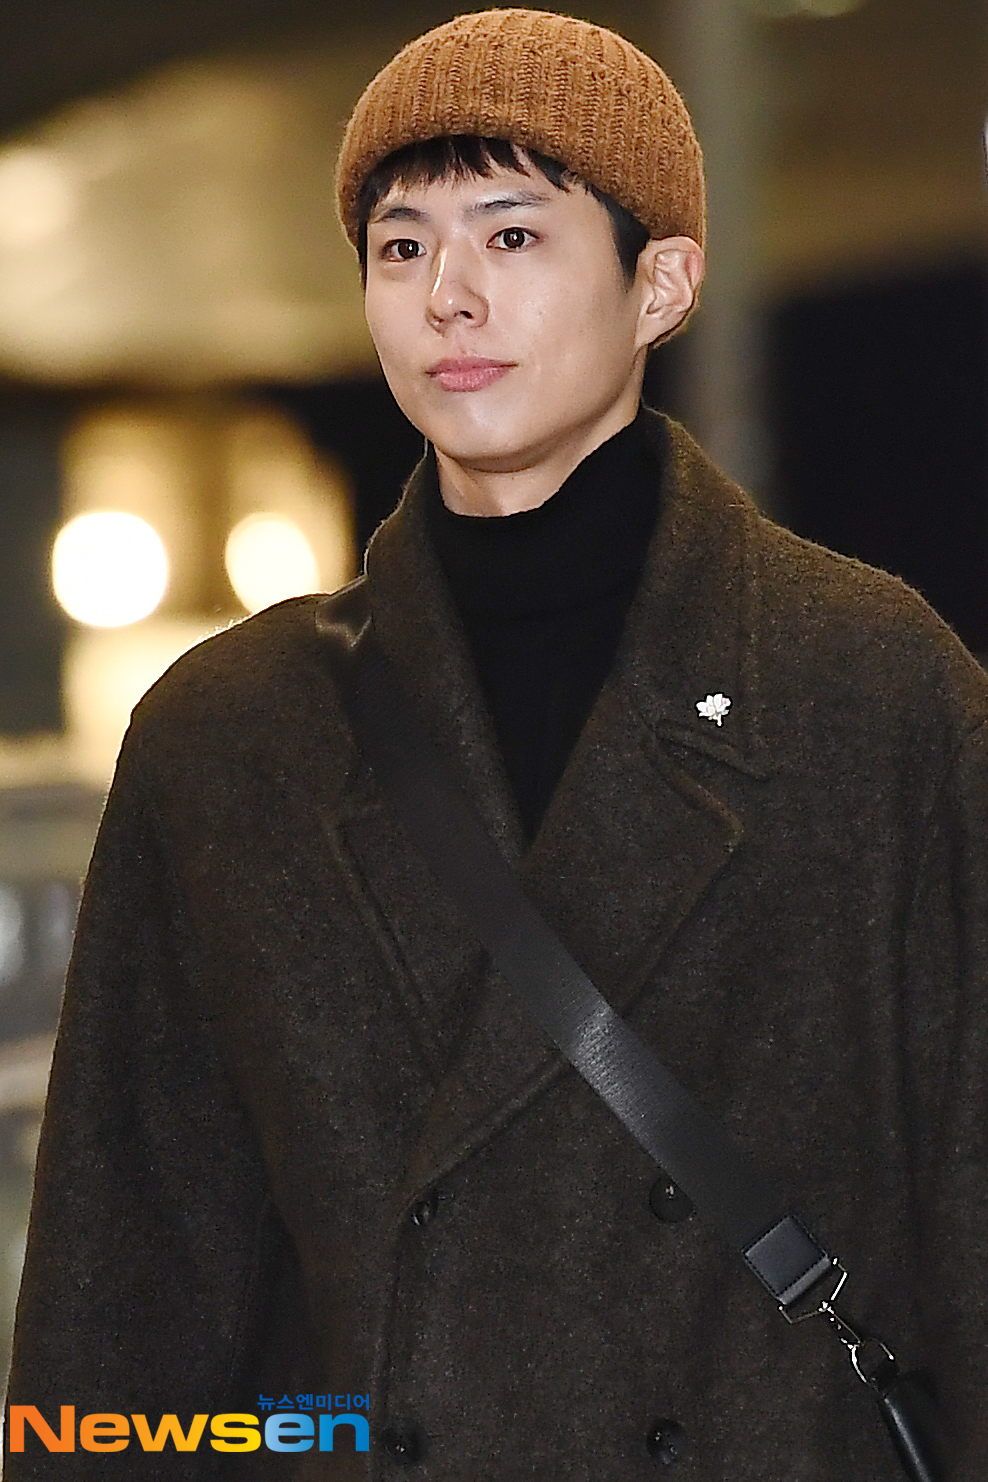 Actor Park Bo-gum (PARK BO GUM) departed for Japan Nagoya on December 4th (Wednesday) at the Japan Nagoya Dome on December 3rd through the Incheon International Airport in Unseo-dong, Jung-gu, Incheon, to attend the 2019 MAMA (Mnet Asian Music Awards 2019 Mnet Asian Music Awards).Actor Park Bo-gum (PARK BO GUM) is leaving for Japan.exponential earthquake